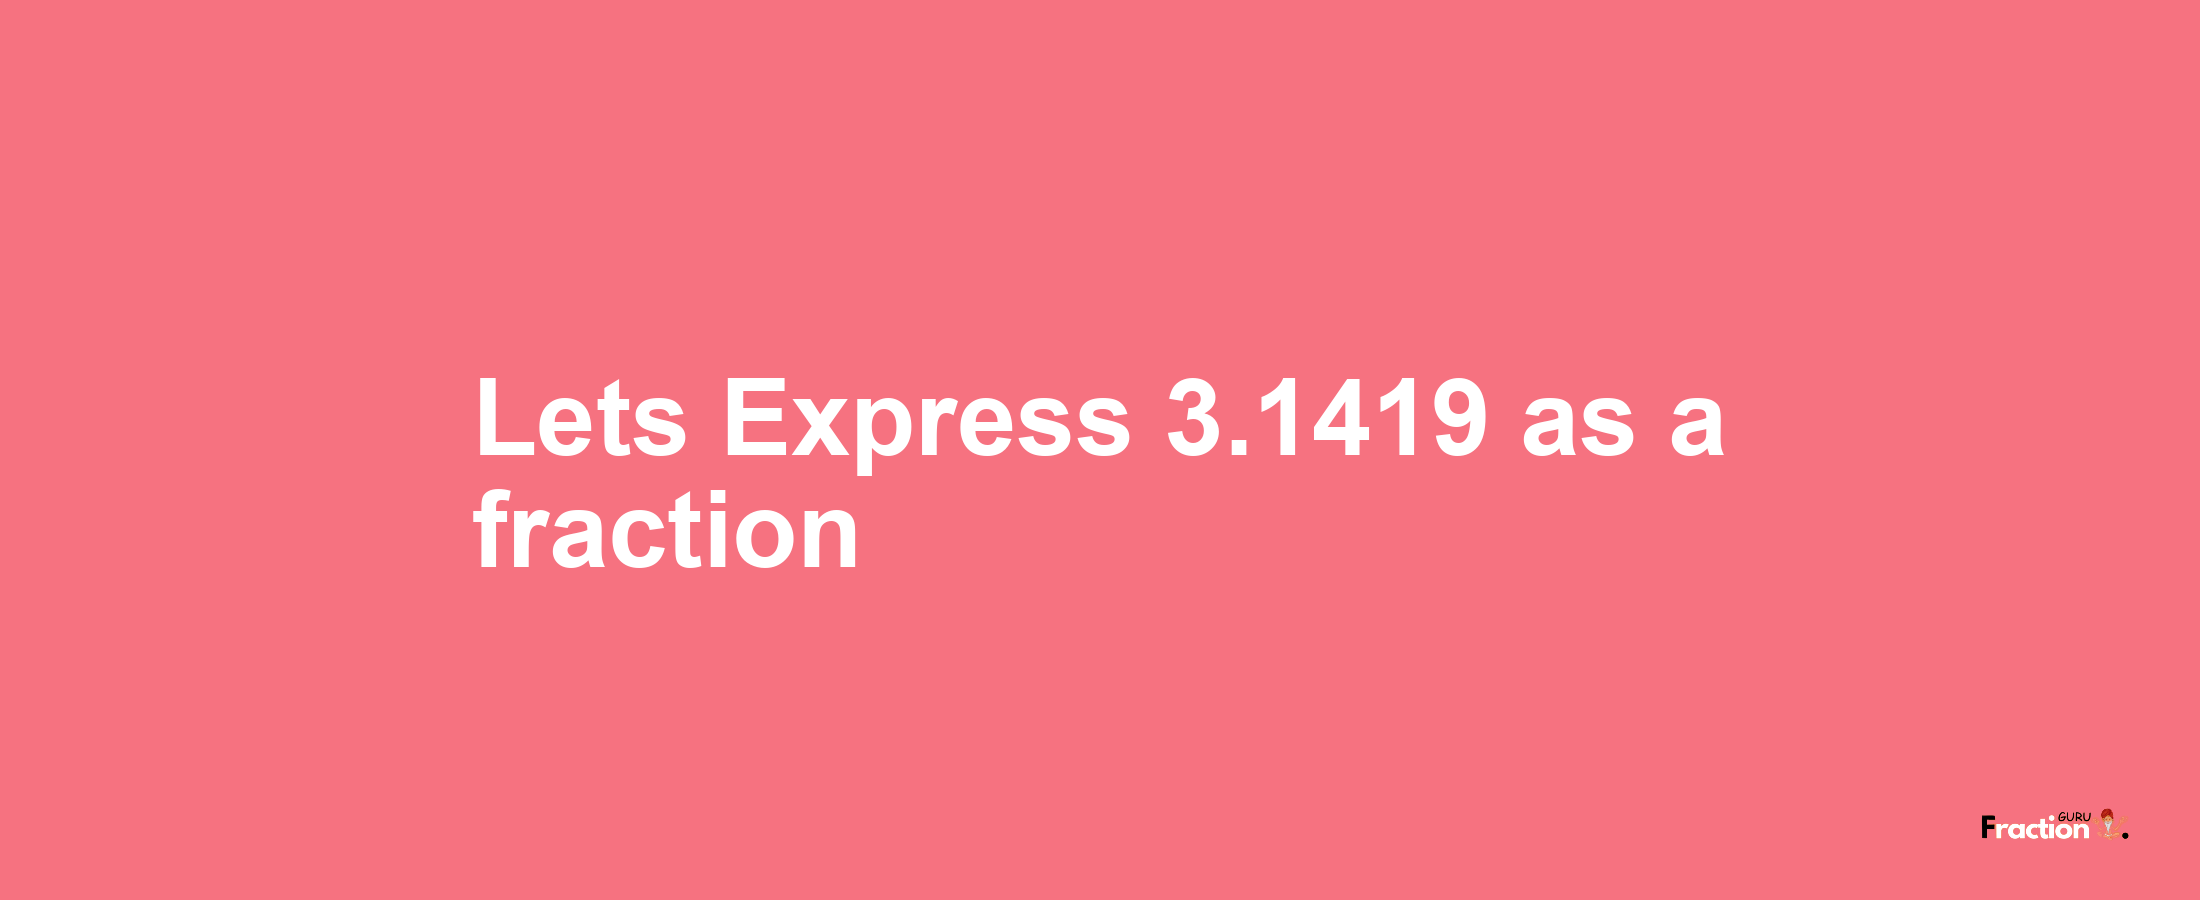 Lets Express 3.1419 as afraction